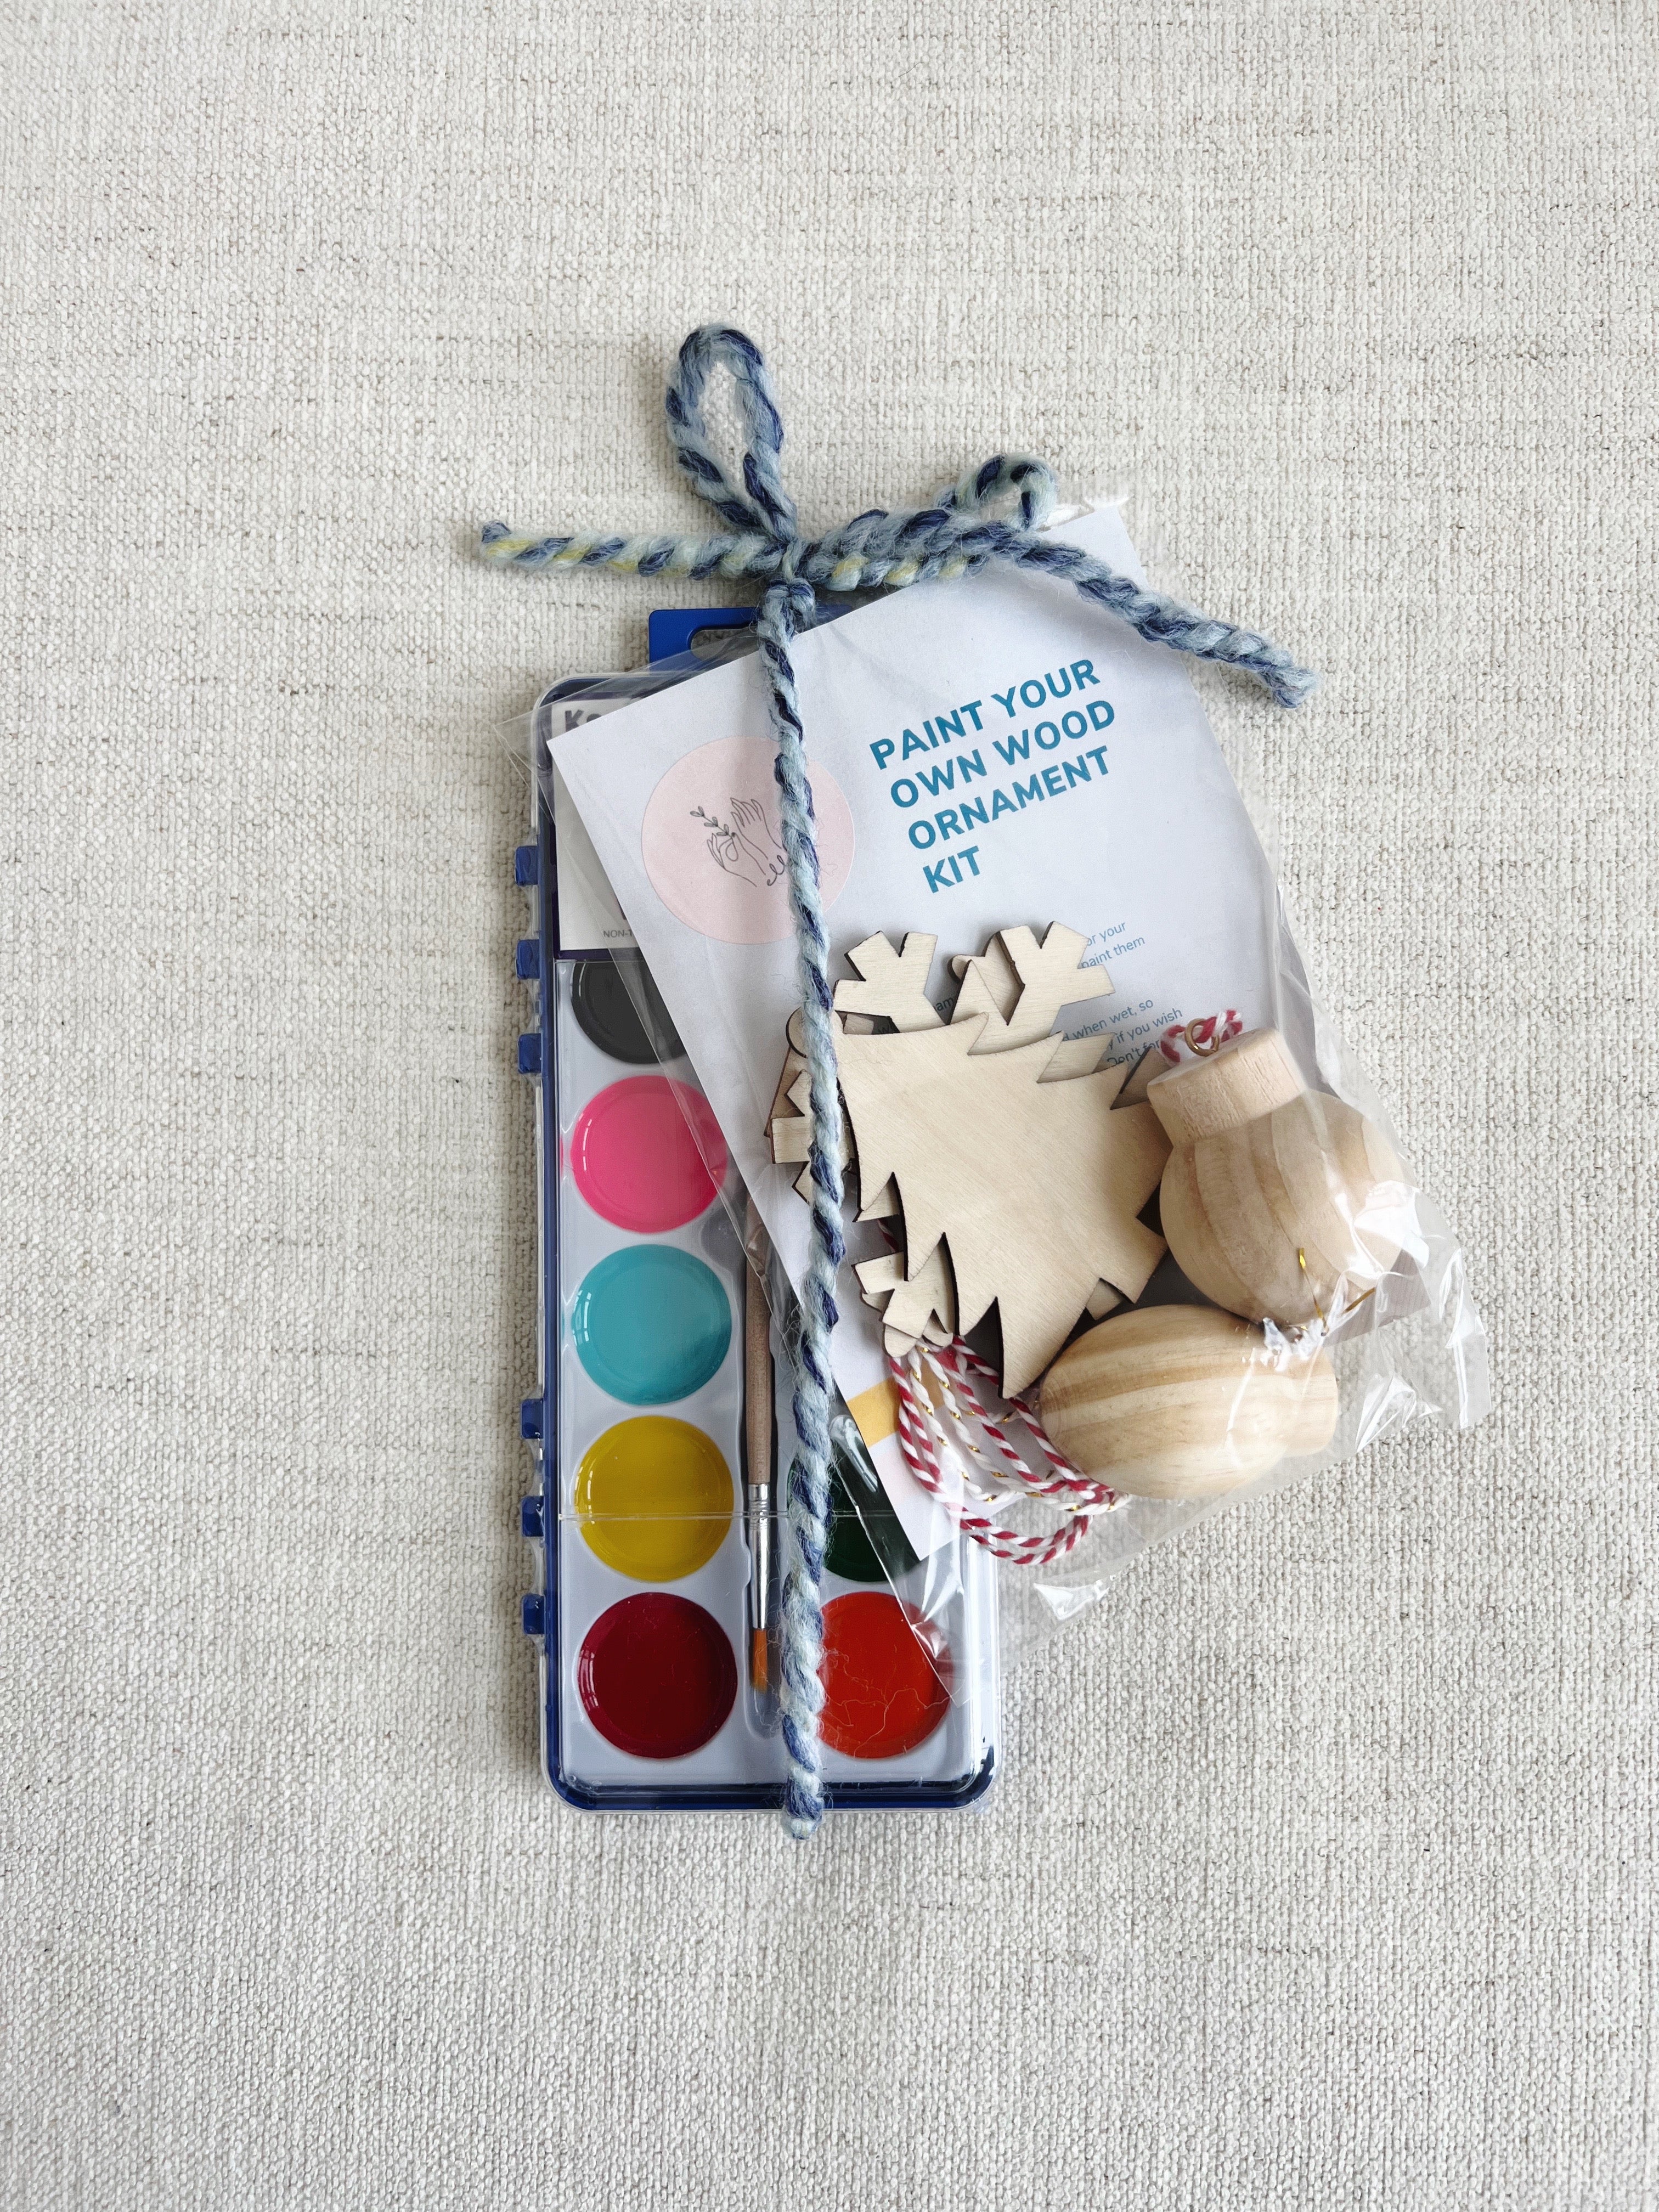 Paint Your Own Ornaments Kit – Momkind